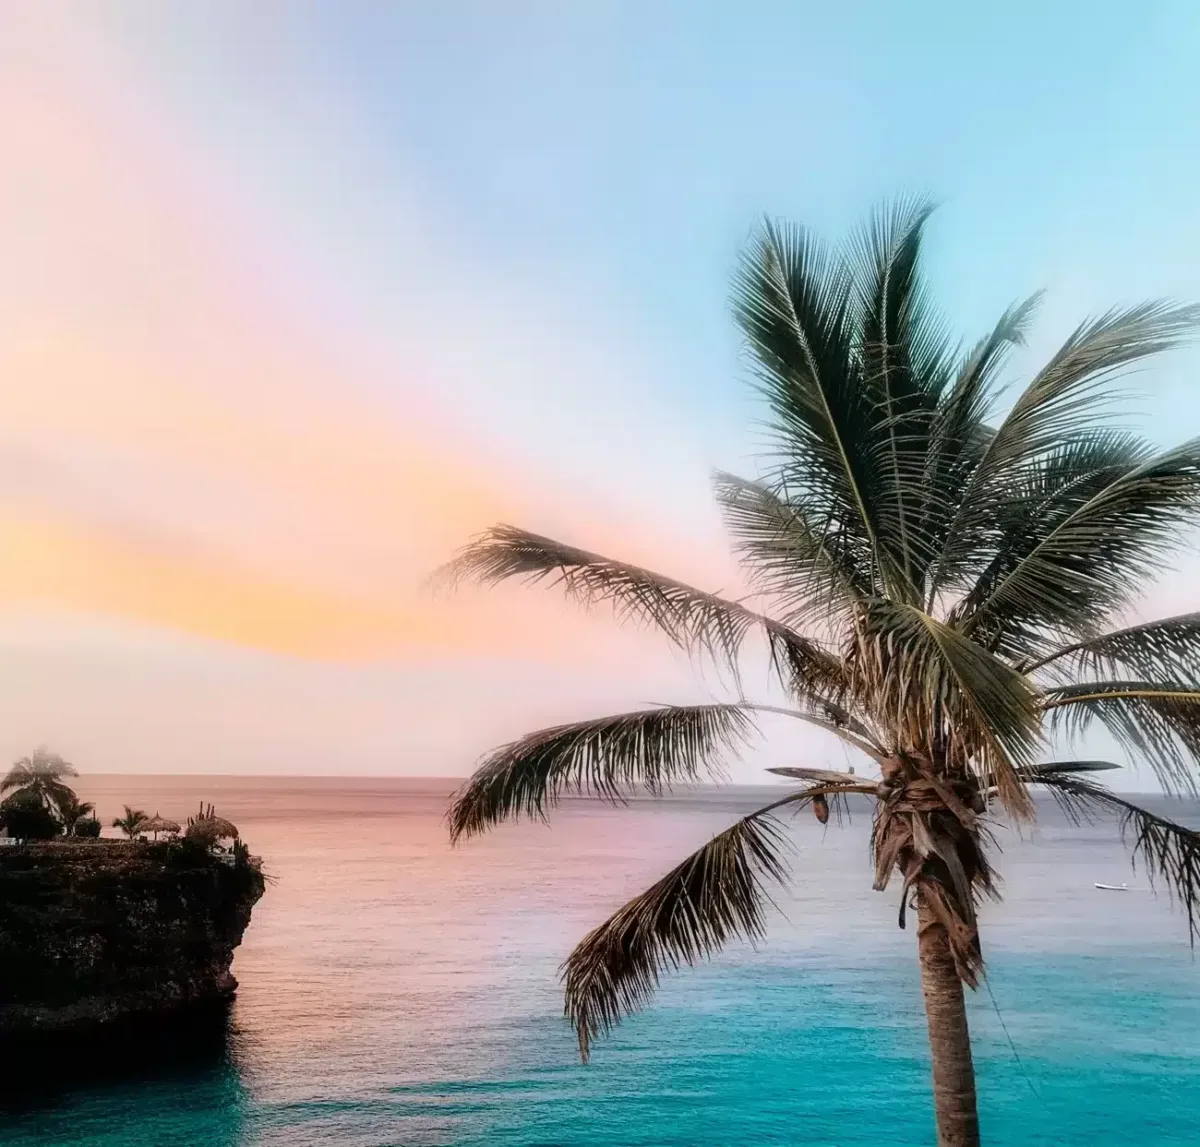 Sunset sky with beautiful colors of orange, pink and blue and palm tree in front and dark blue ocean in the background